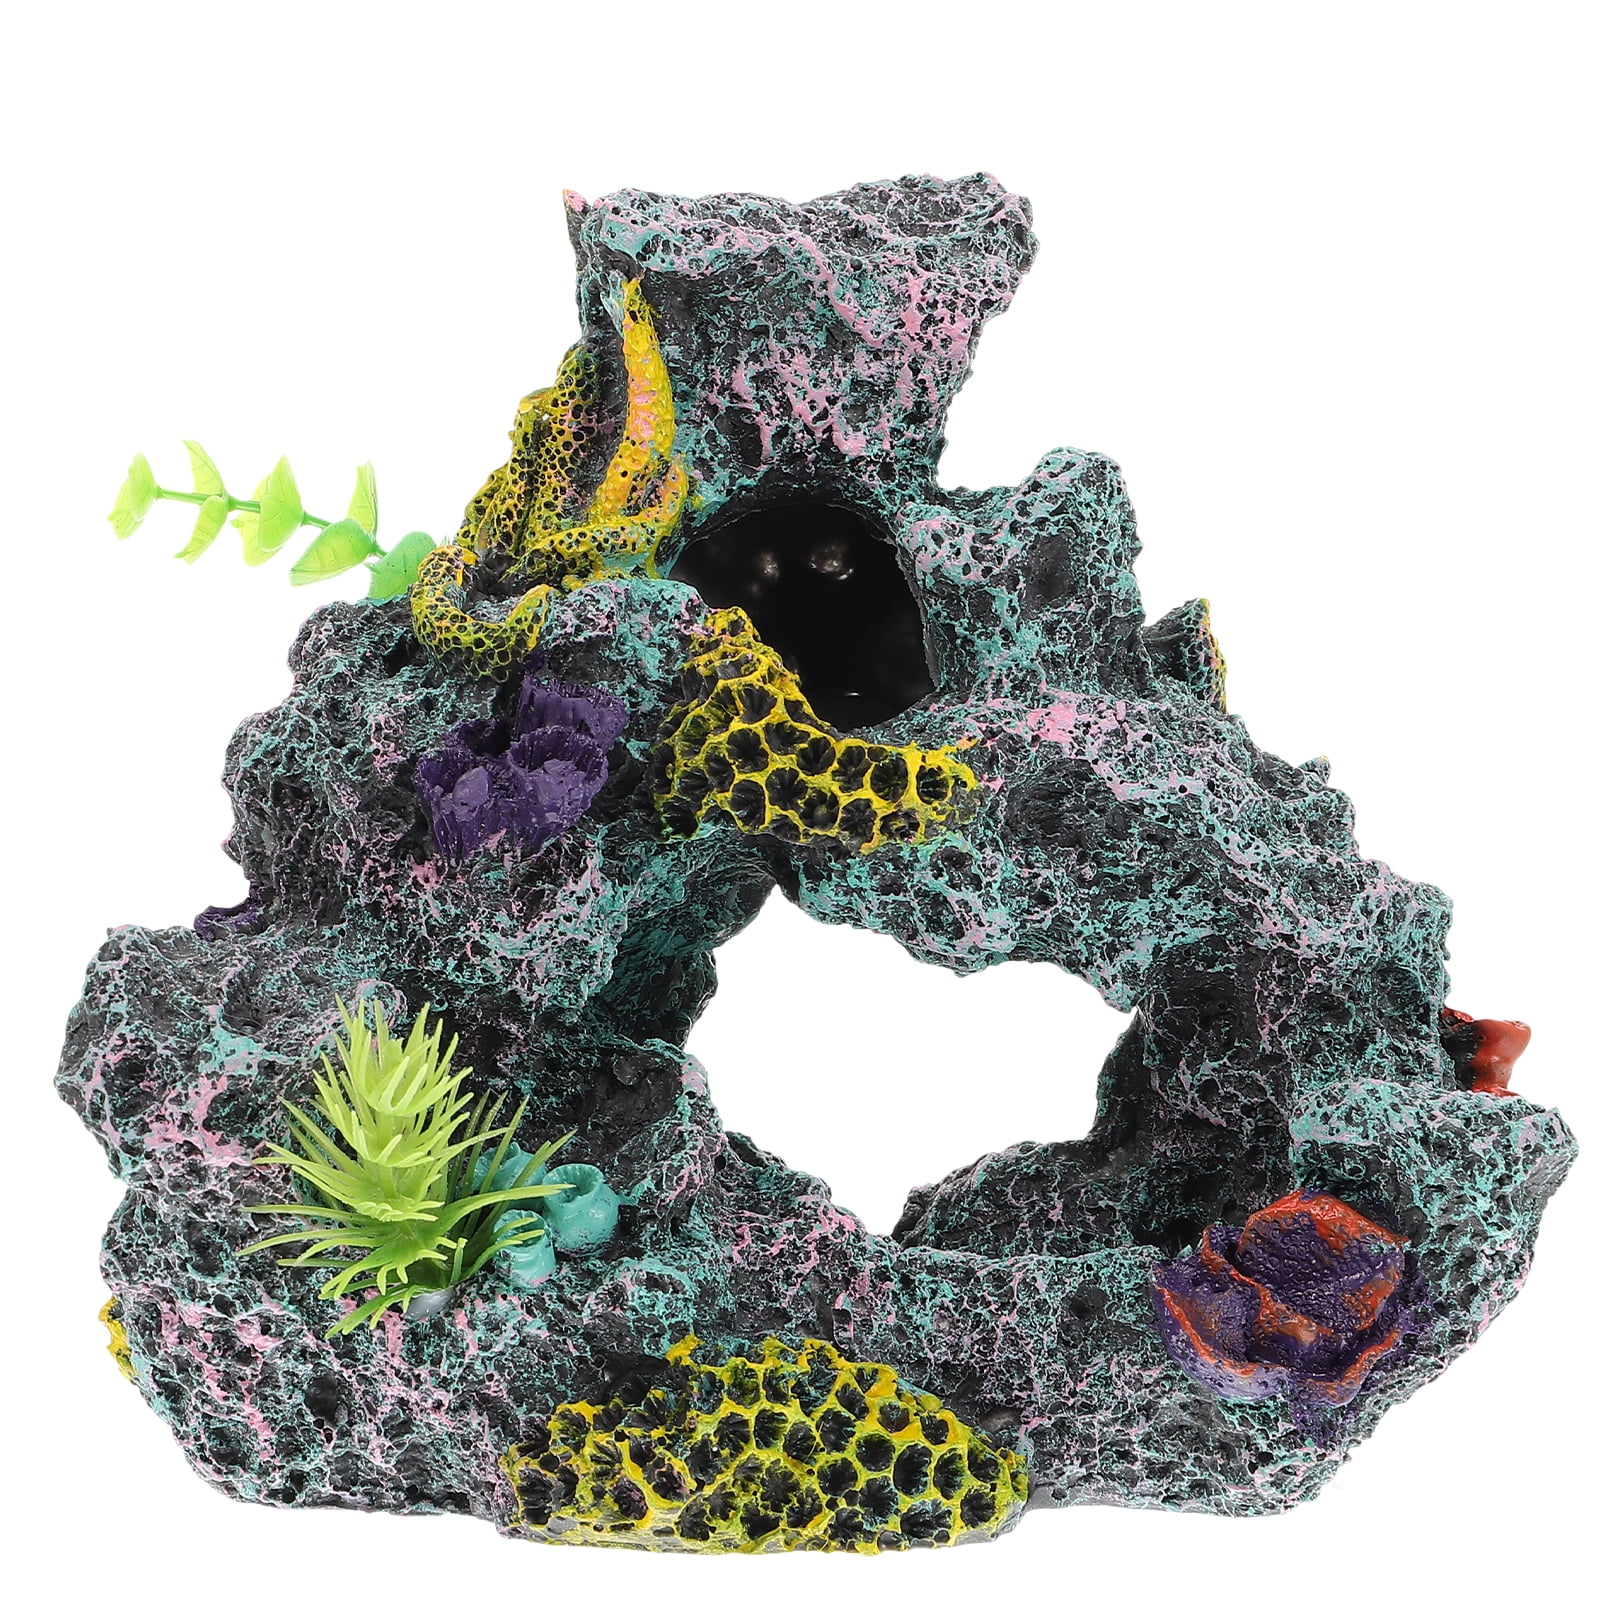 Buy Fish Tank Rocks Resin Artificial Coral Inserts Decor Shell